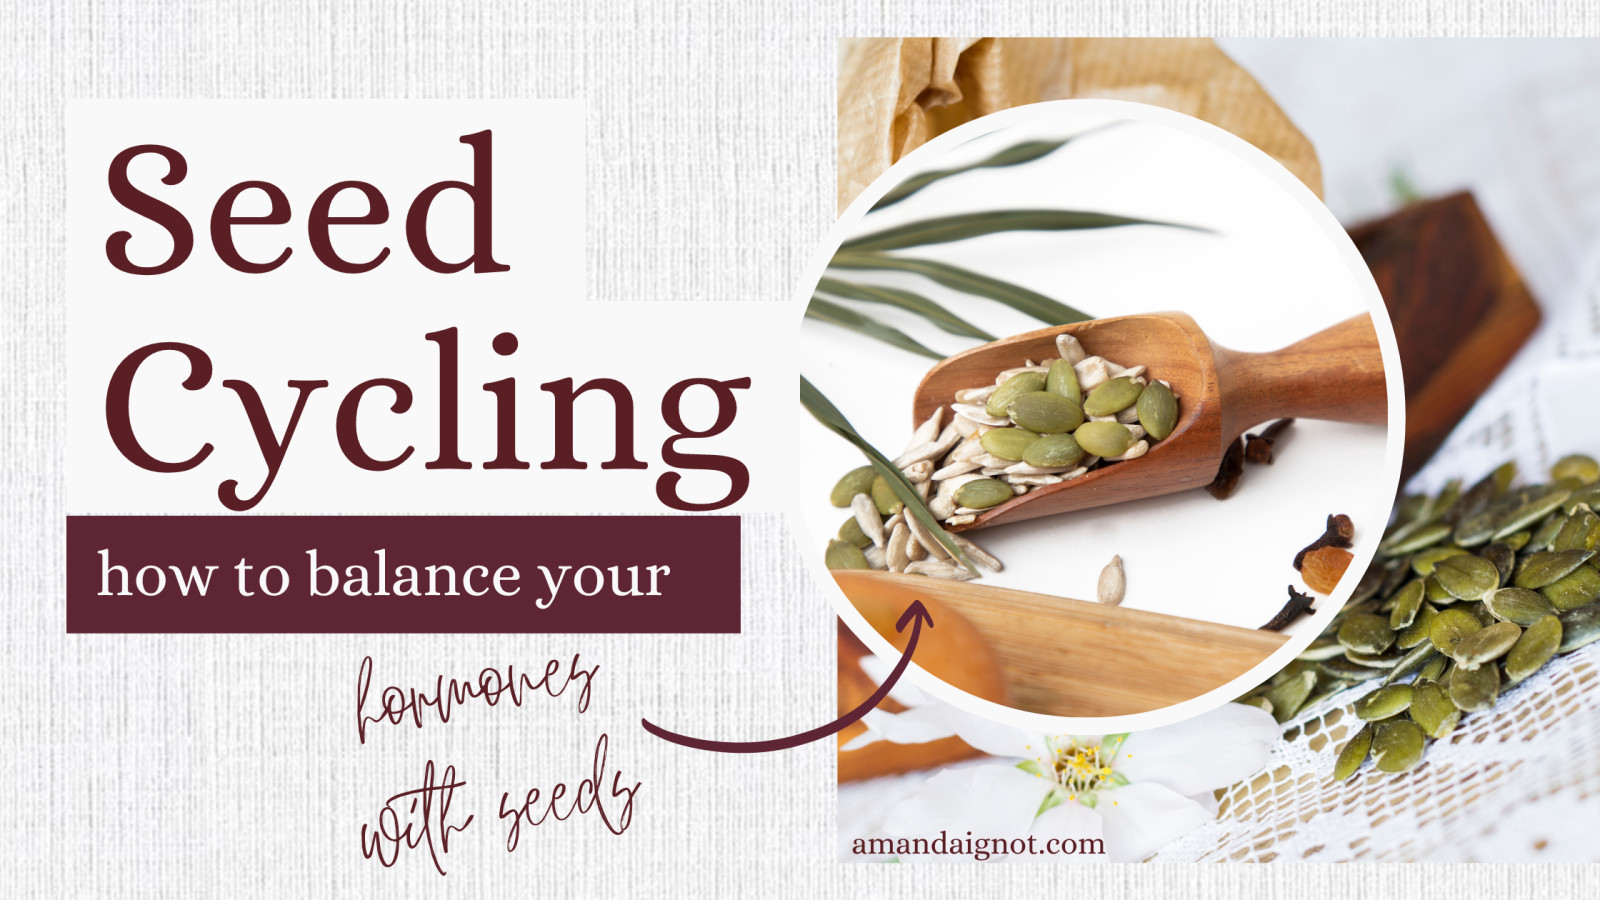 Seed Cycling: How to Balance Your Hormones with Seeds